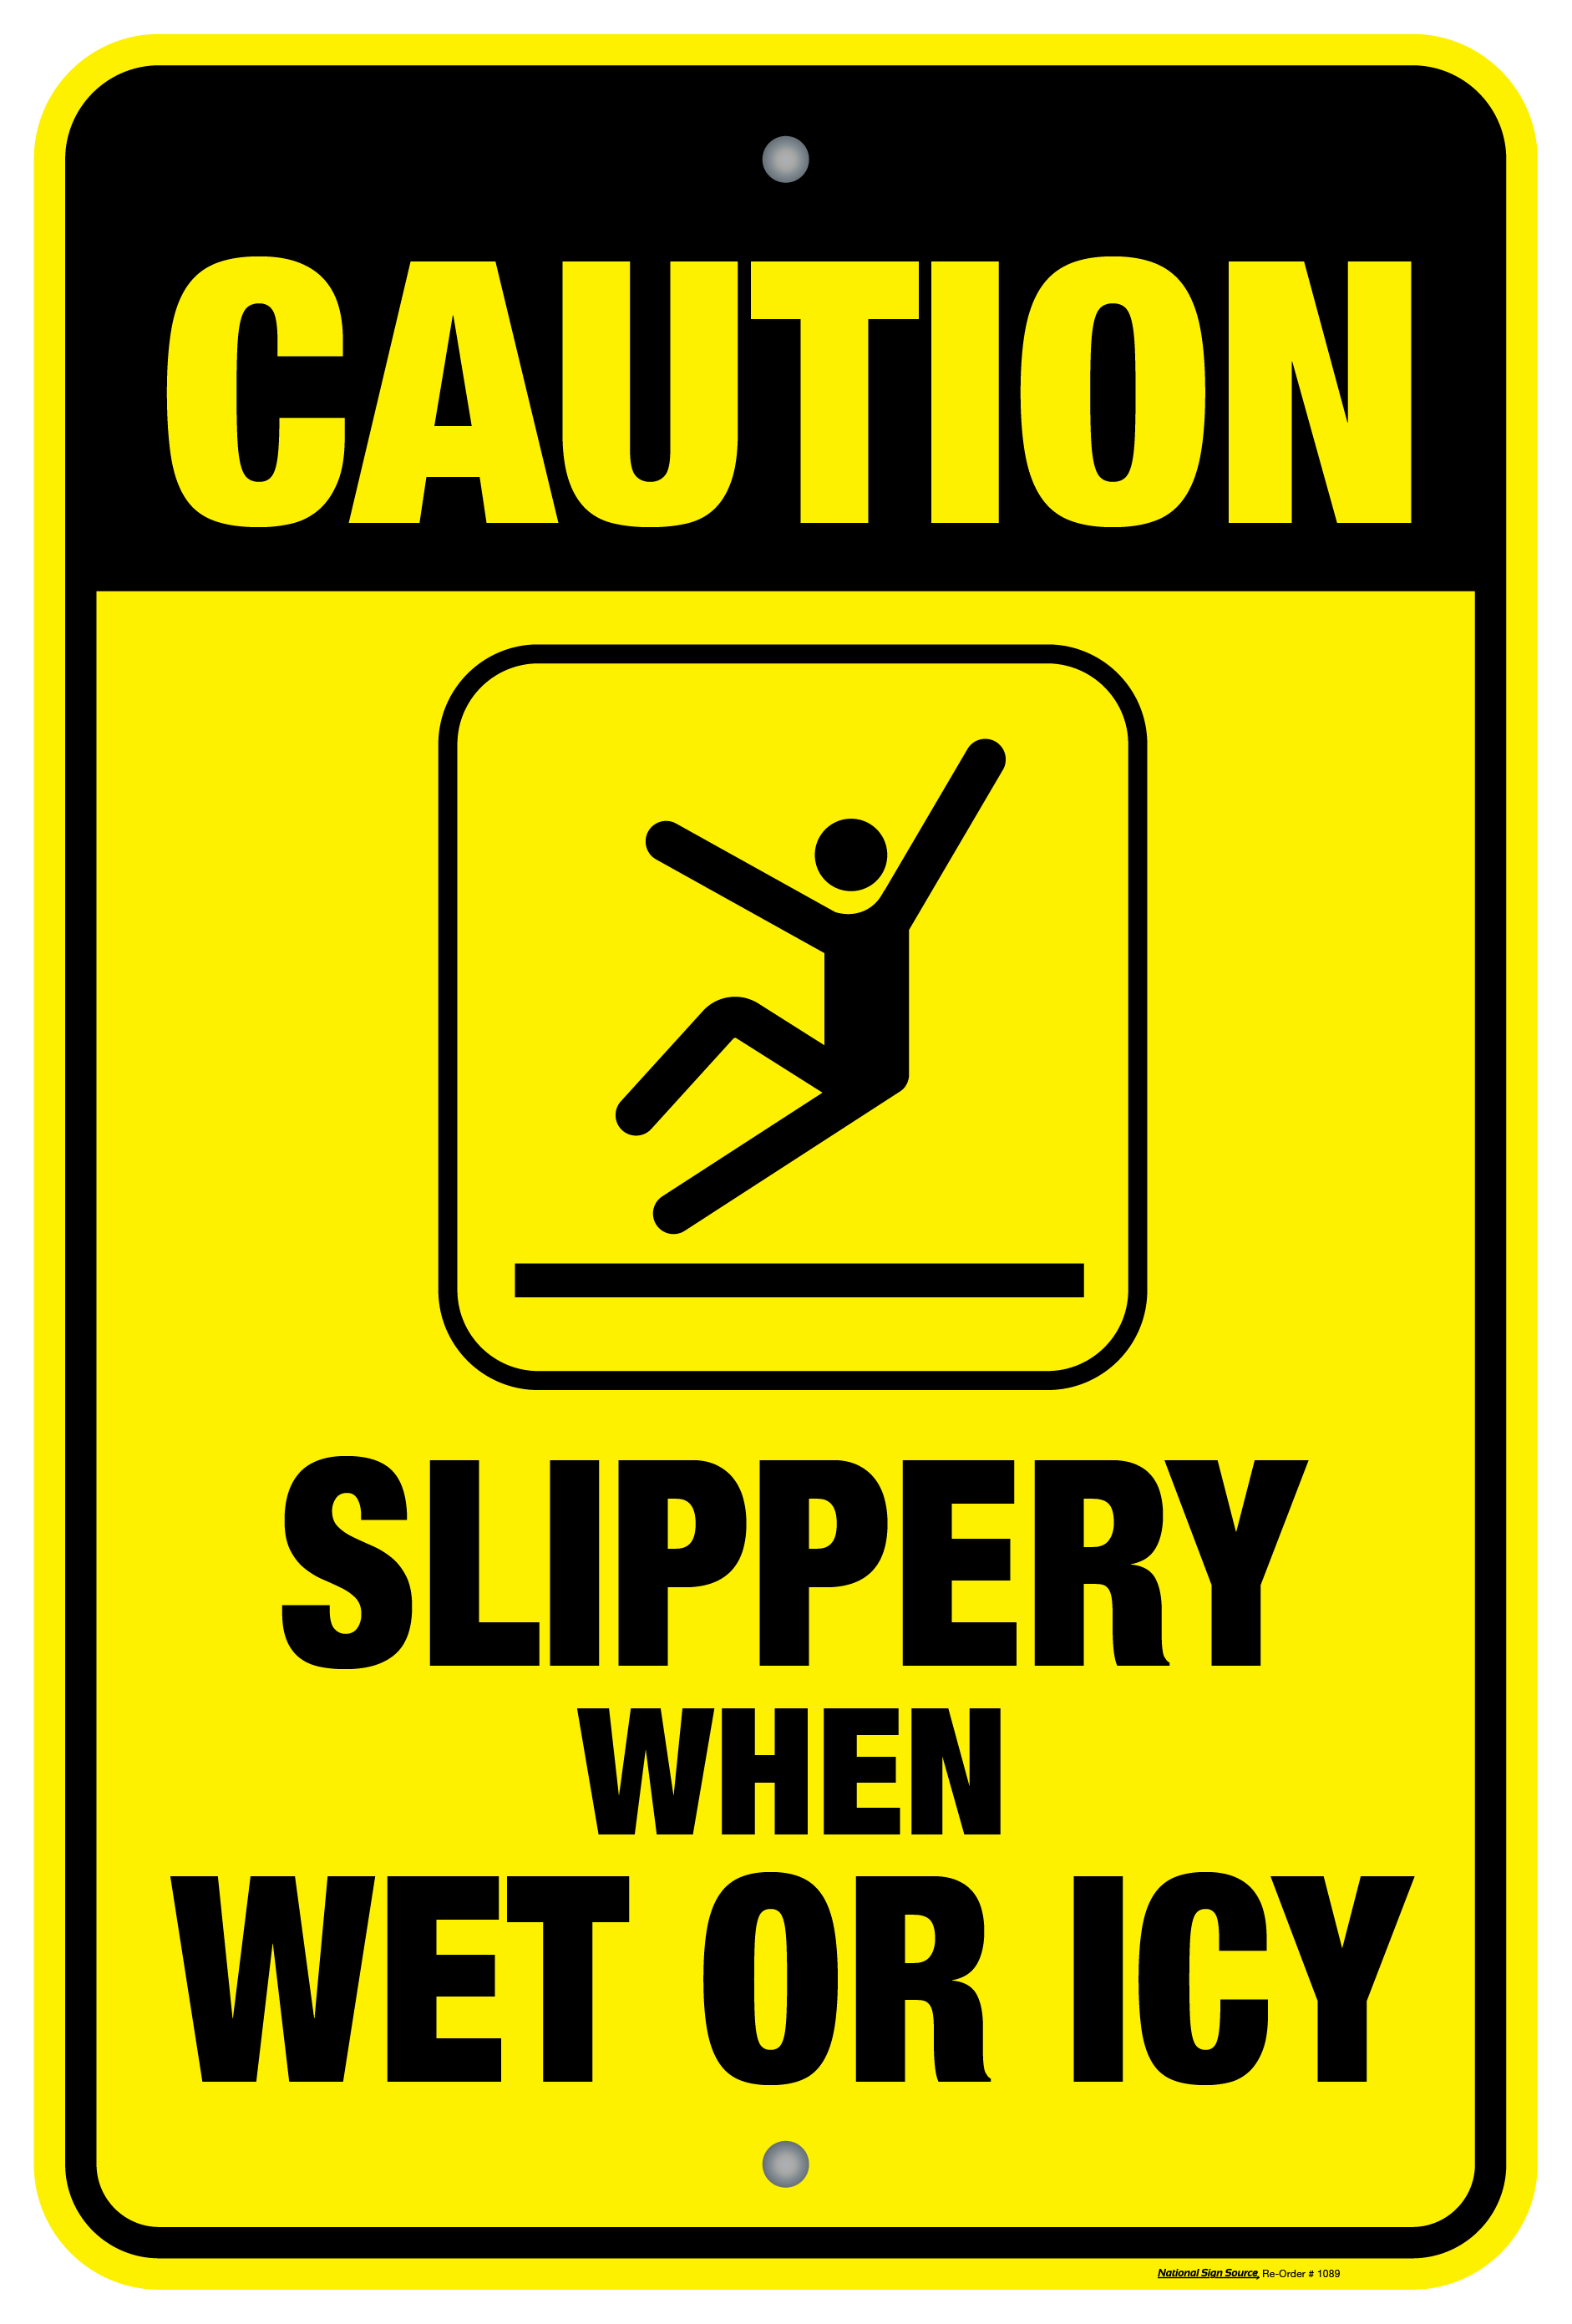 Caution slippery when wet or icy sign.